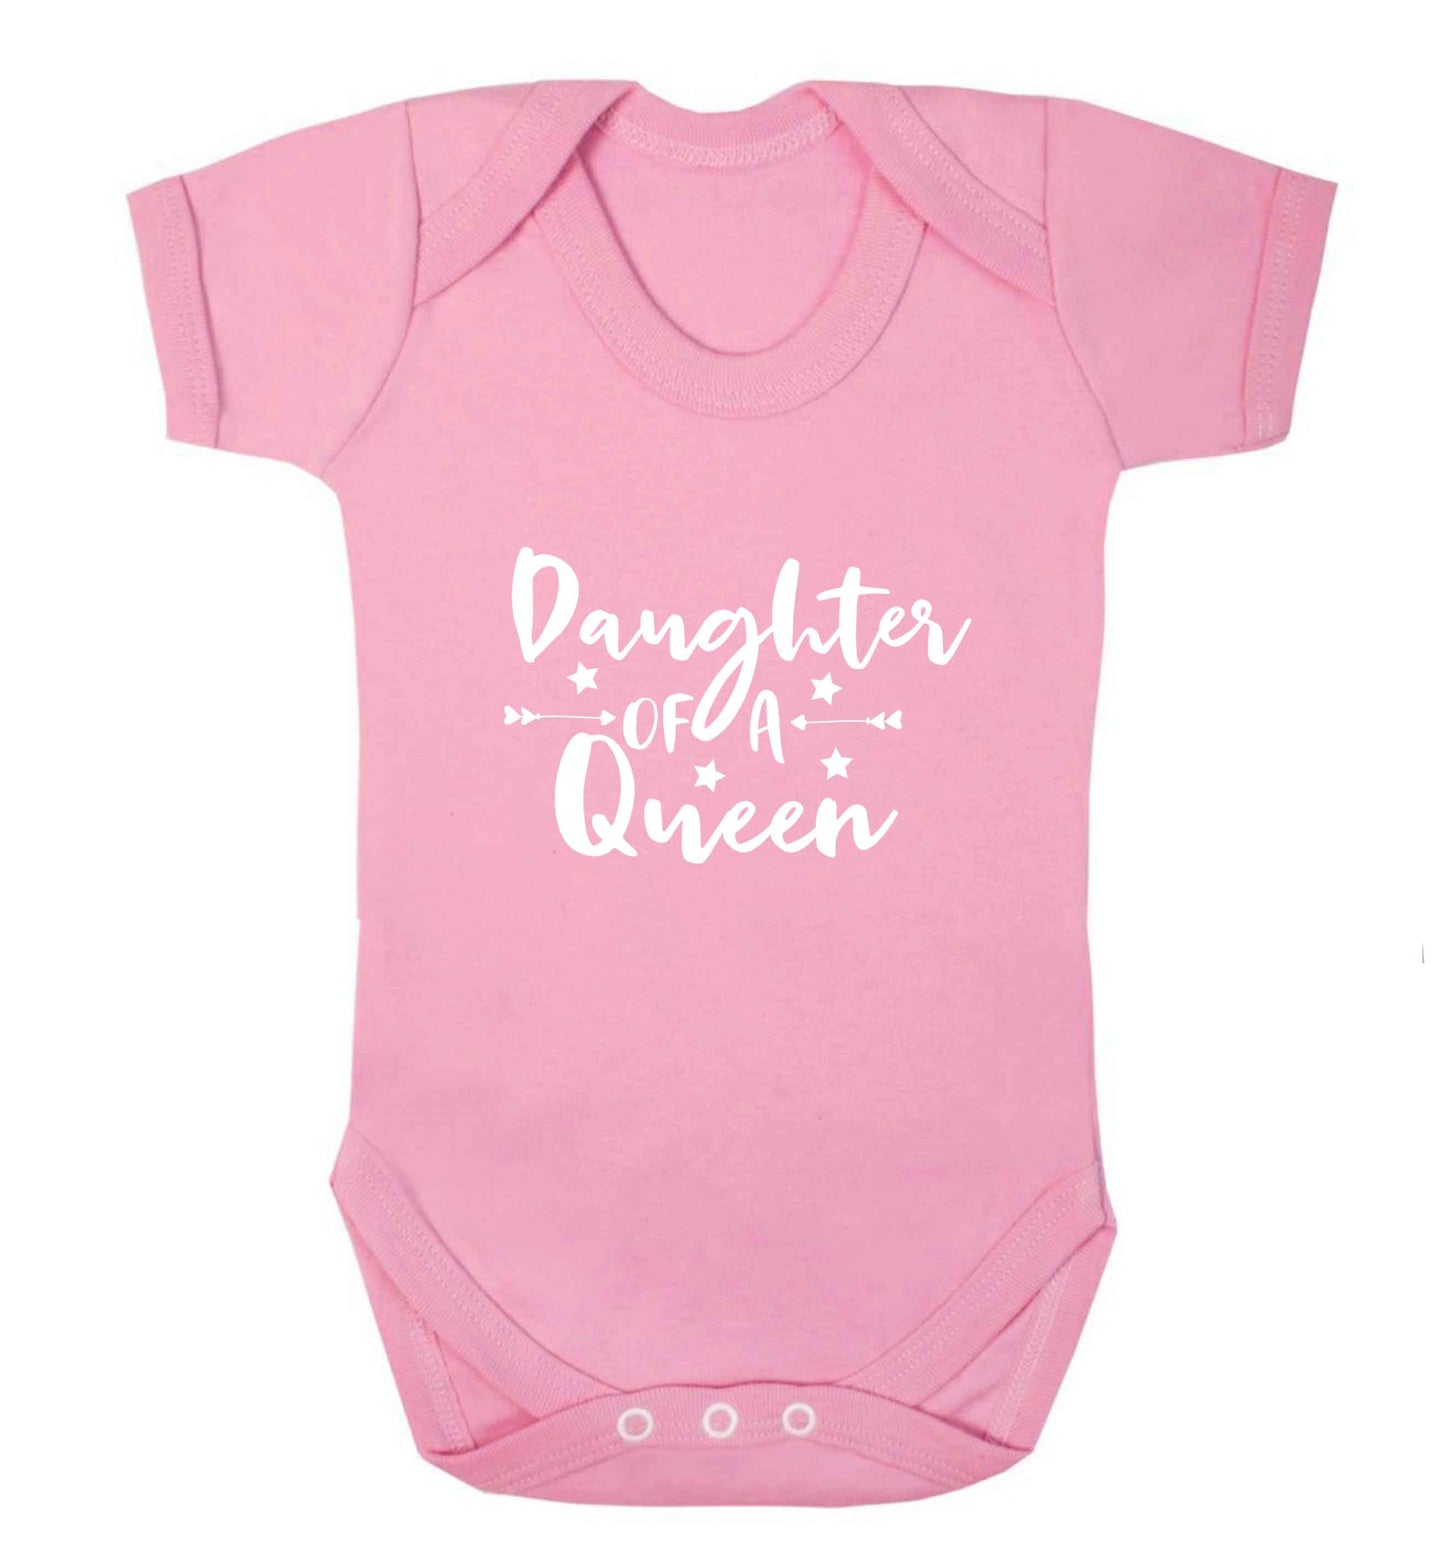 Daughter of a Queen baby vest pale pink 18-24 months